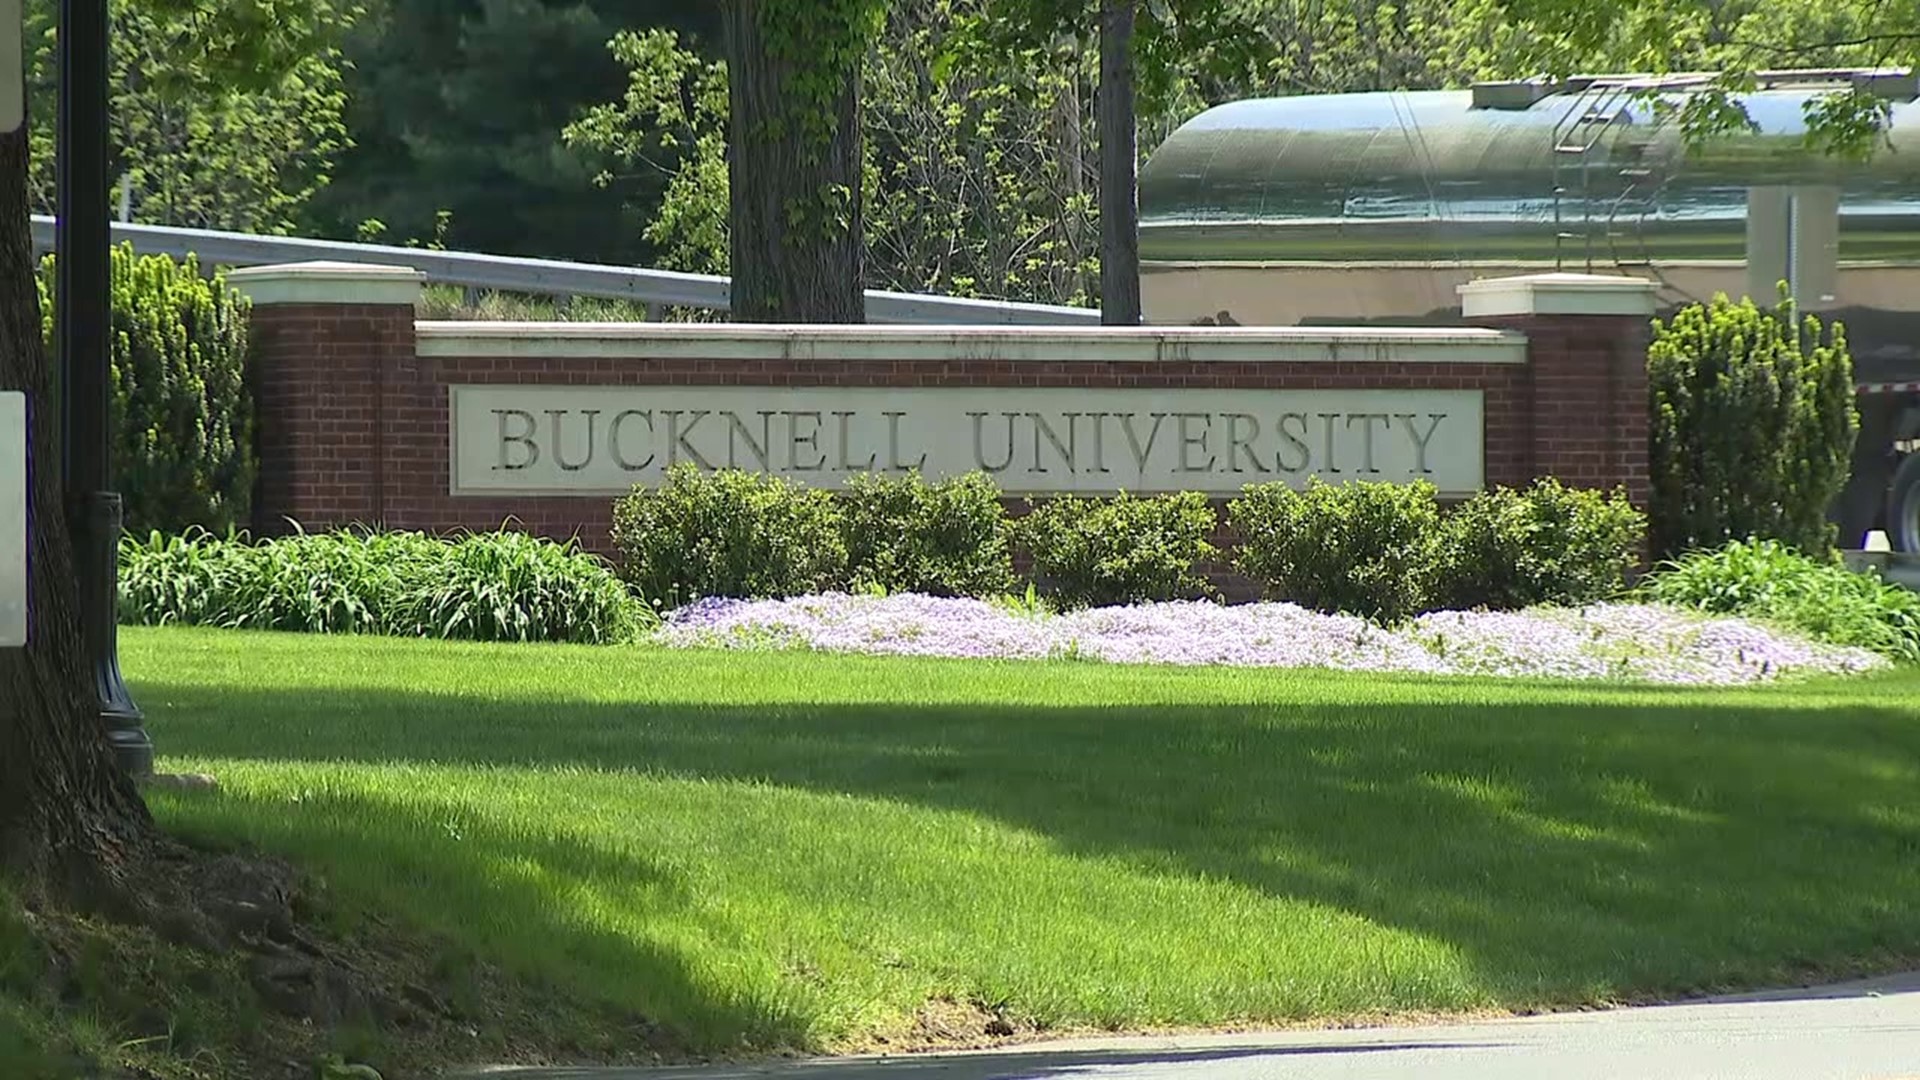 An alert was sent out to the Bucknell University community for an active shooter reported on campus on Friday.